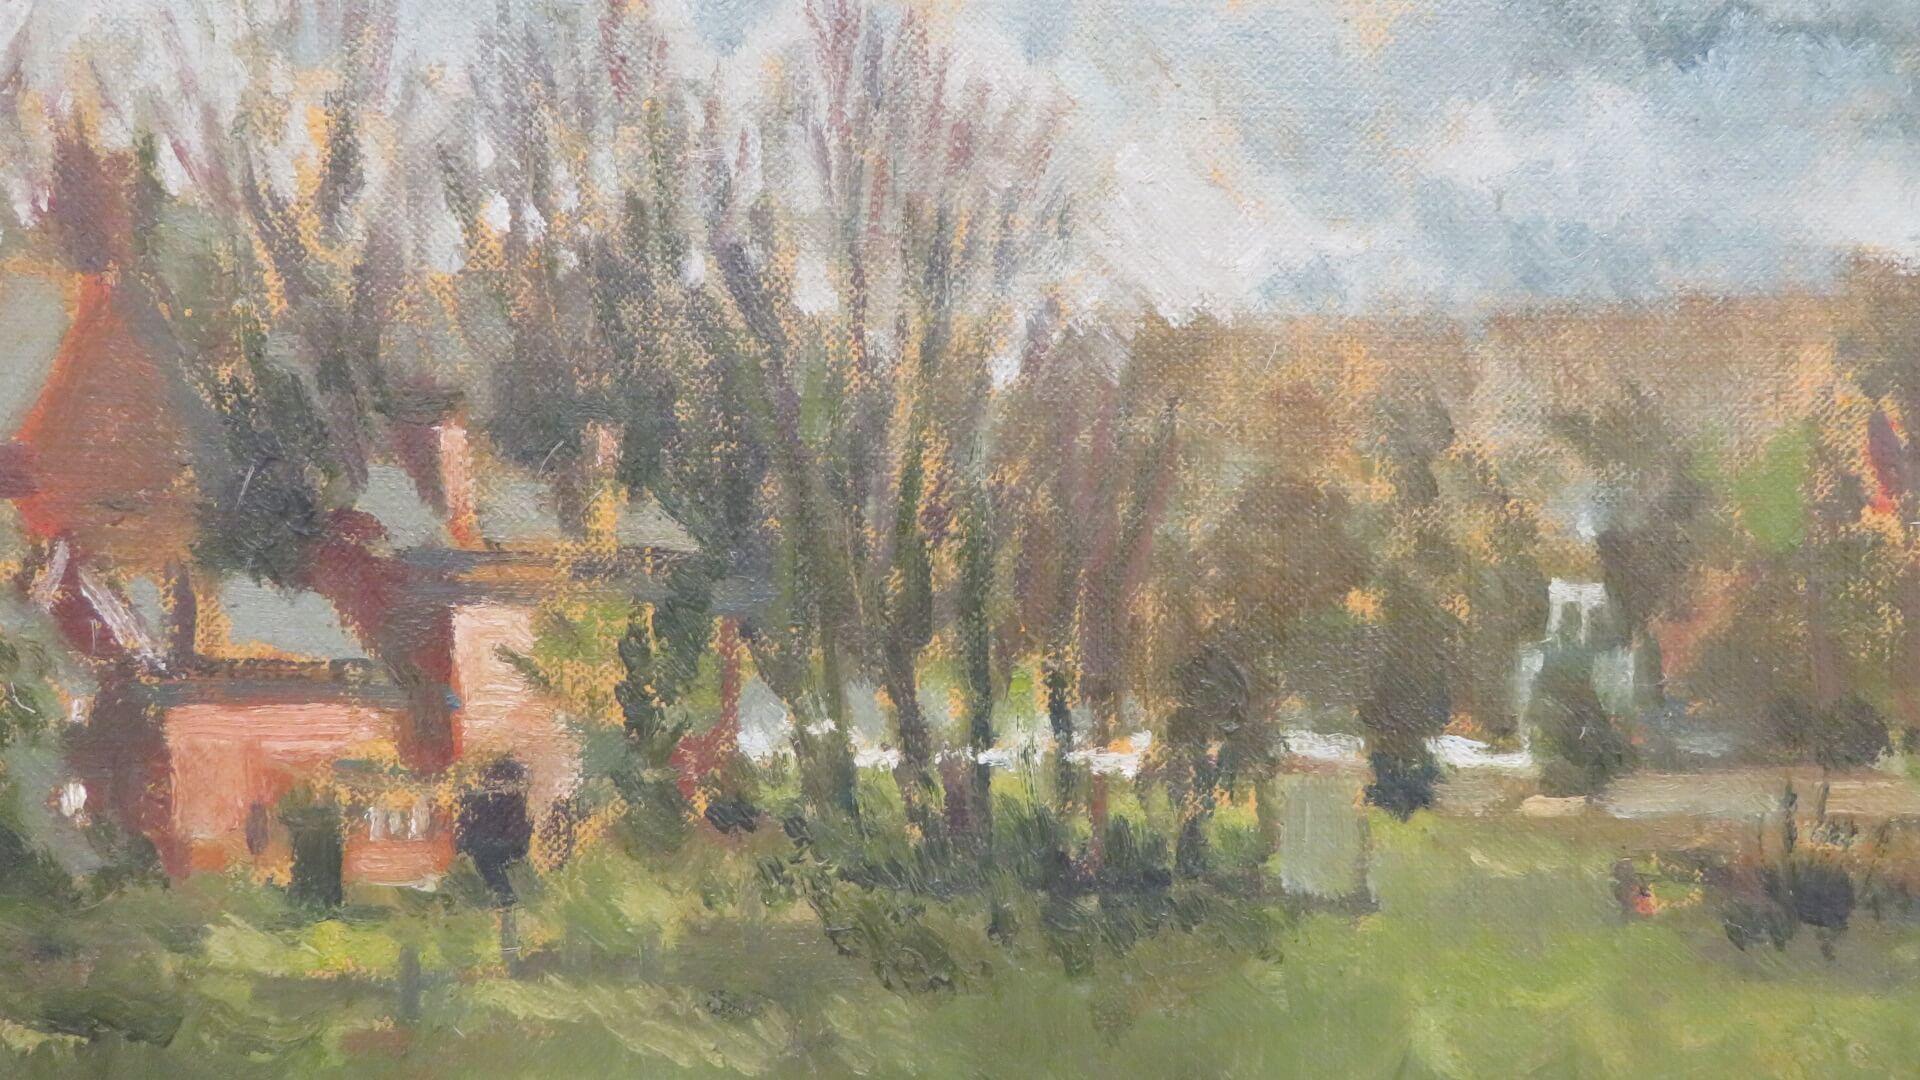 Original oil painting by Tom Coates NEAC (1941-) English impressionist landscape 1